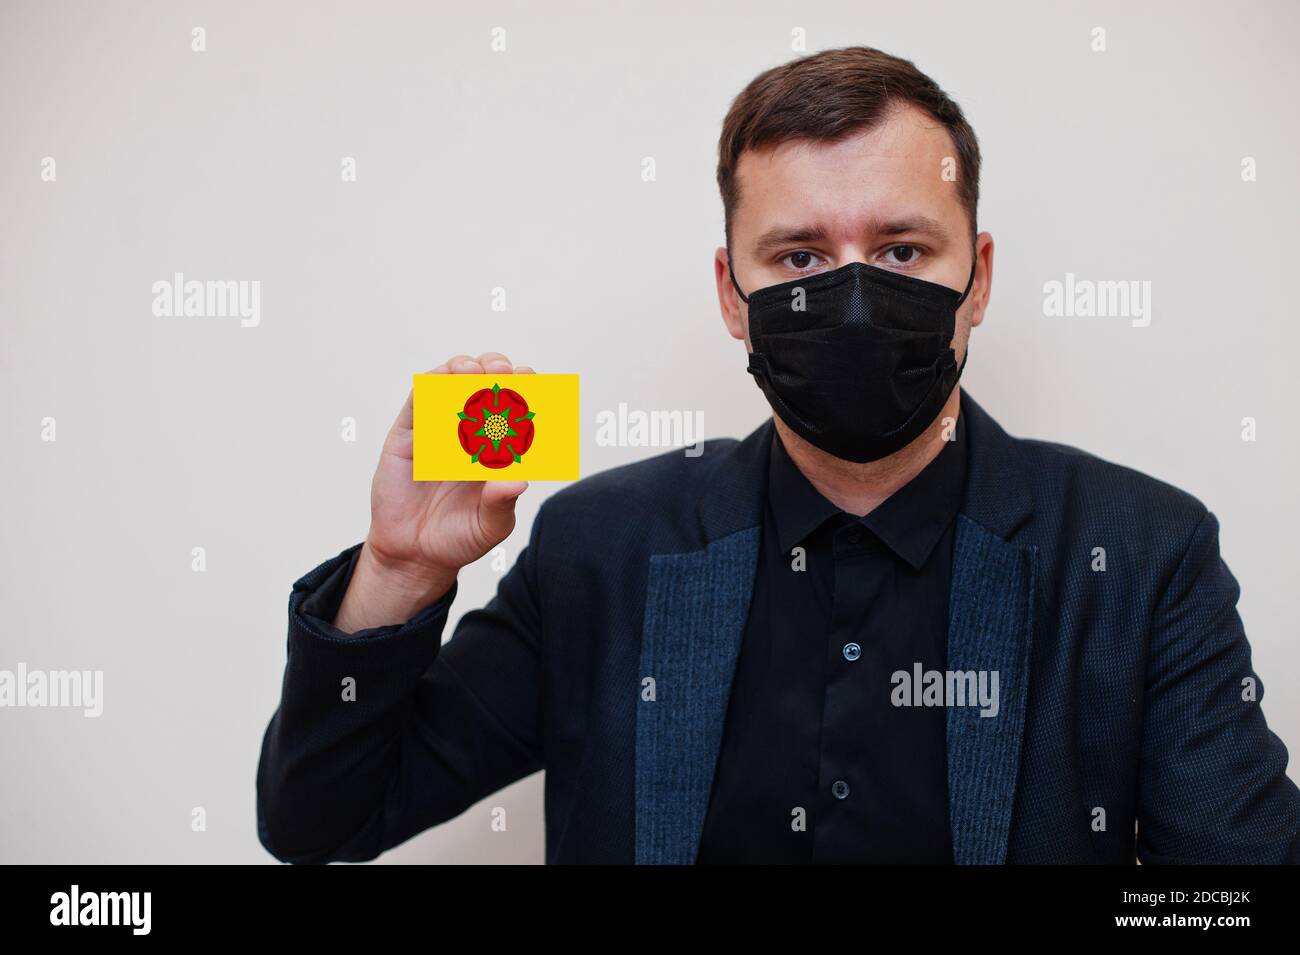 Man wear black formal and protect face mask, hold Lancashire flag card isolated on white background. United Kingdom counties of England coronavirus Co Stock Photo